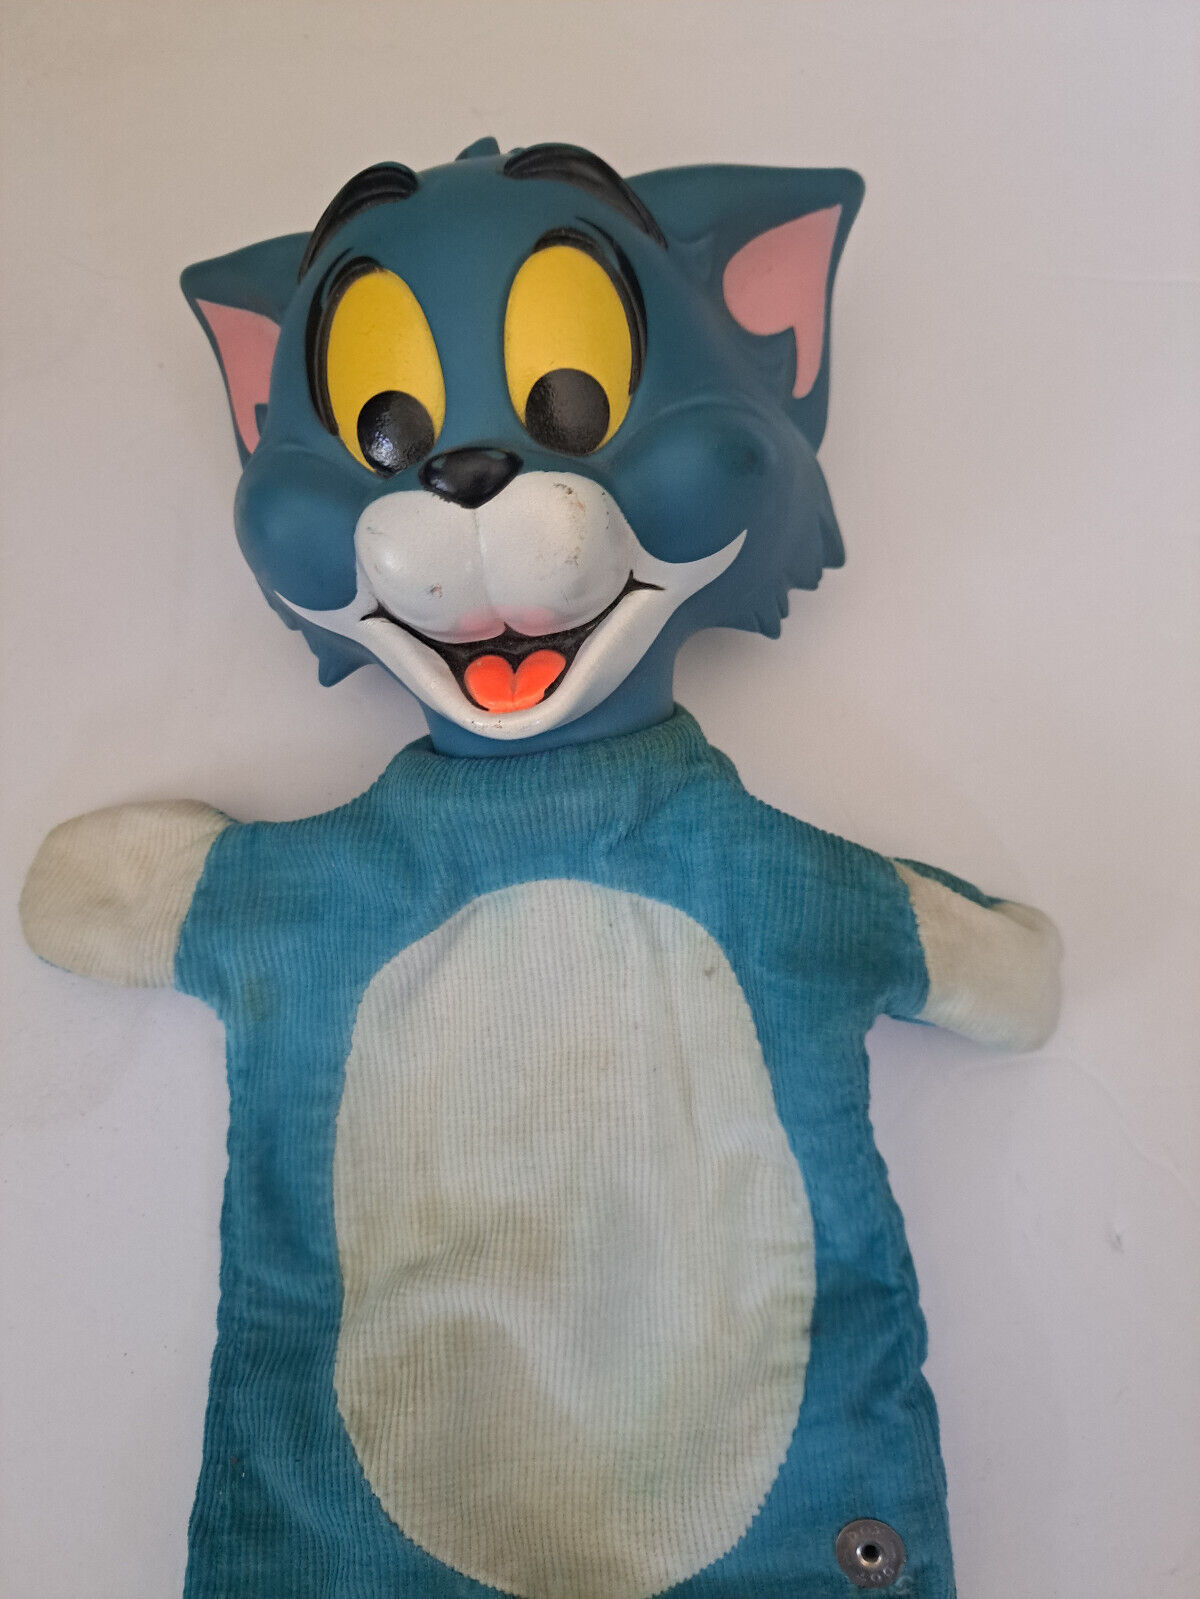 1965 VINTAGE MATTEL TOM AND JERRY TOM CAT HAND PUPPET TOY *NOT WORKING* RARE